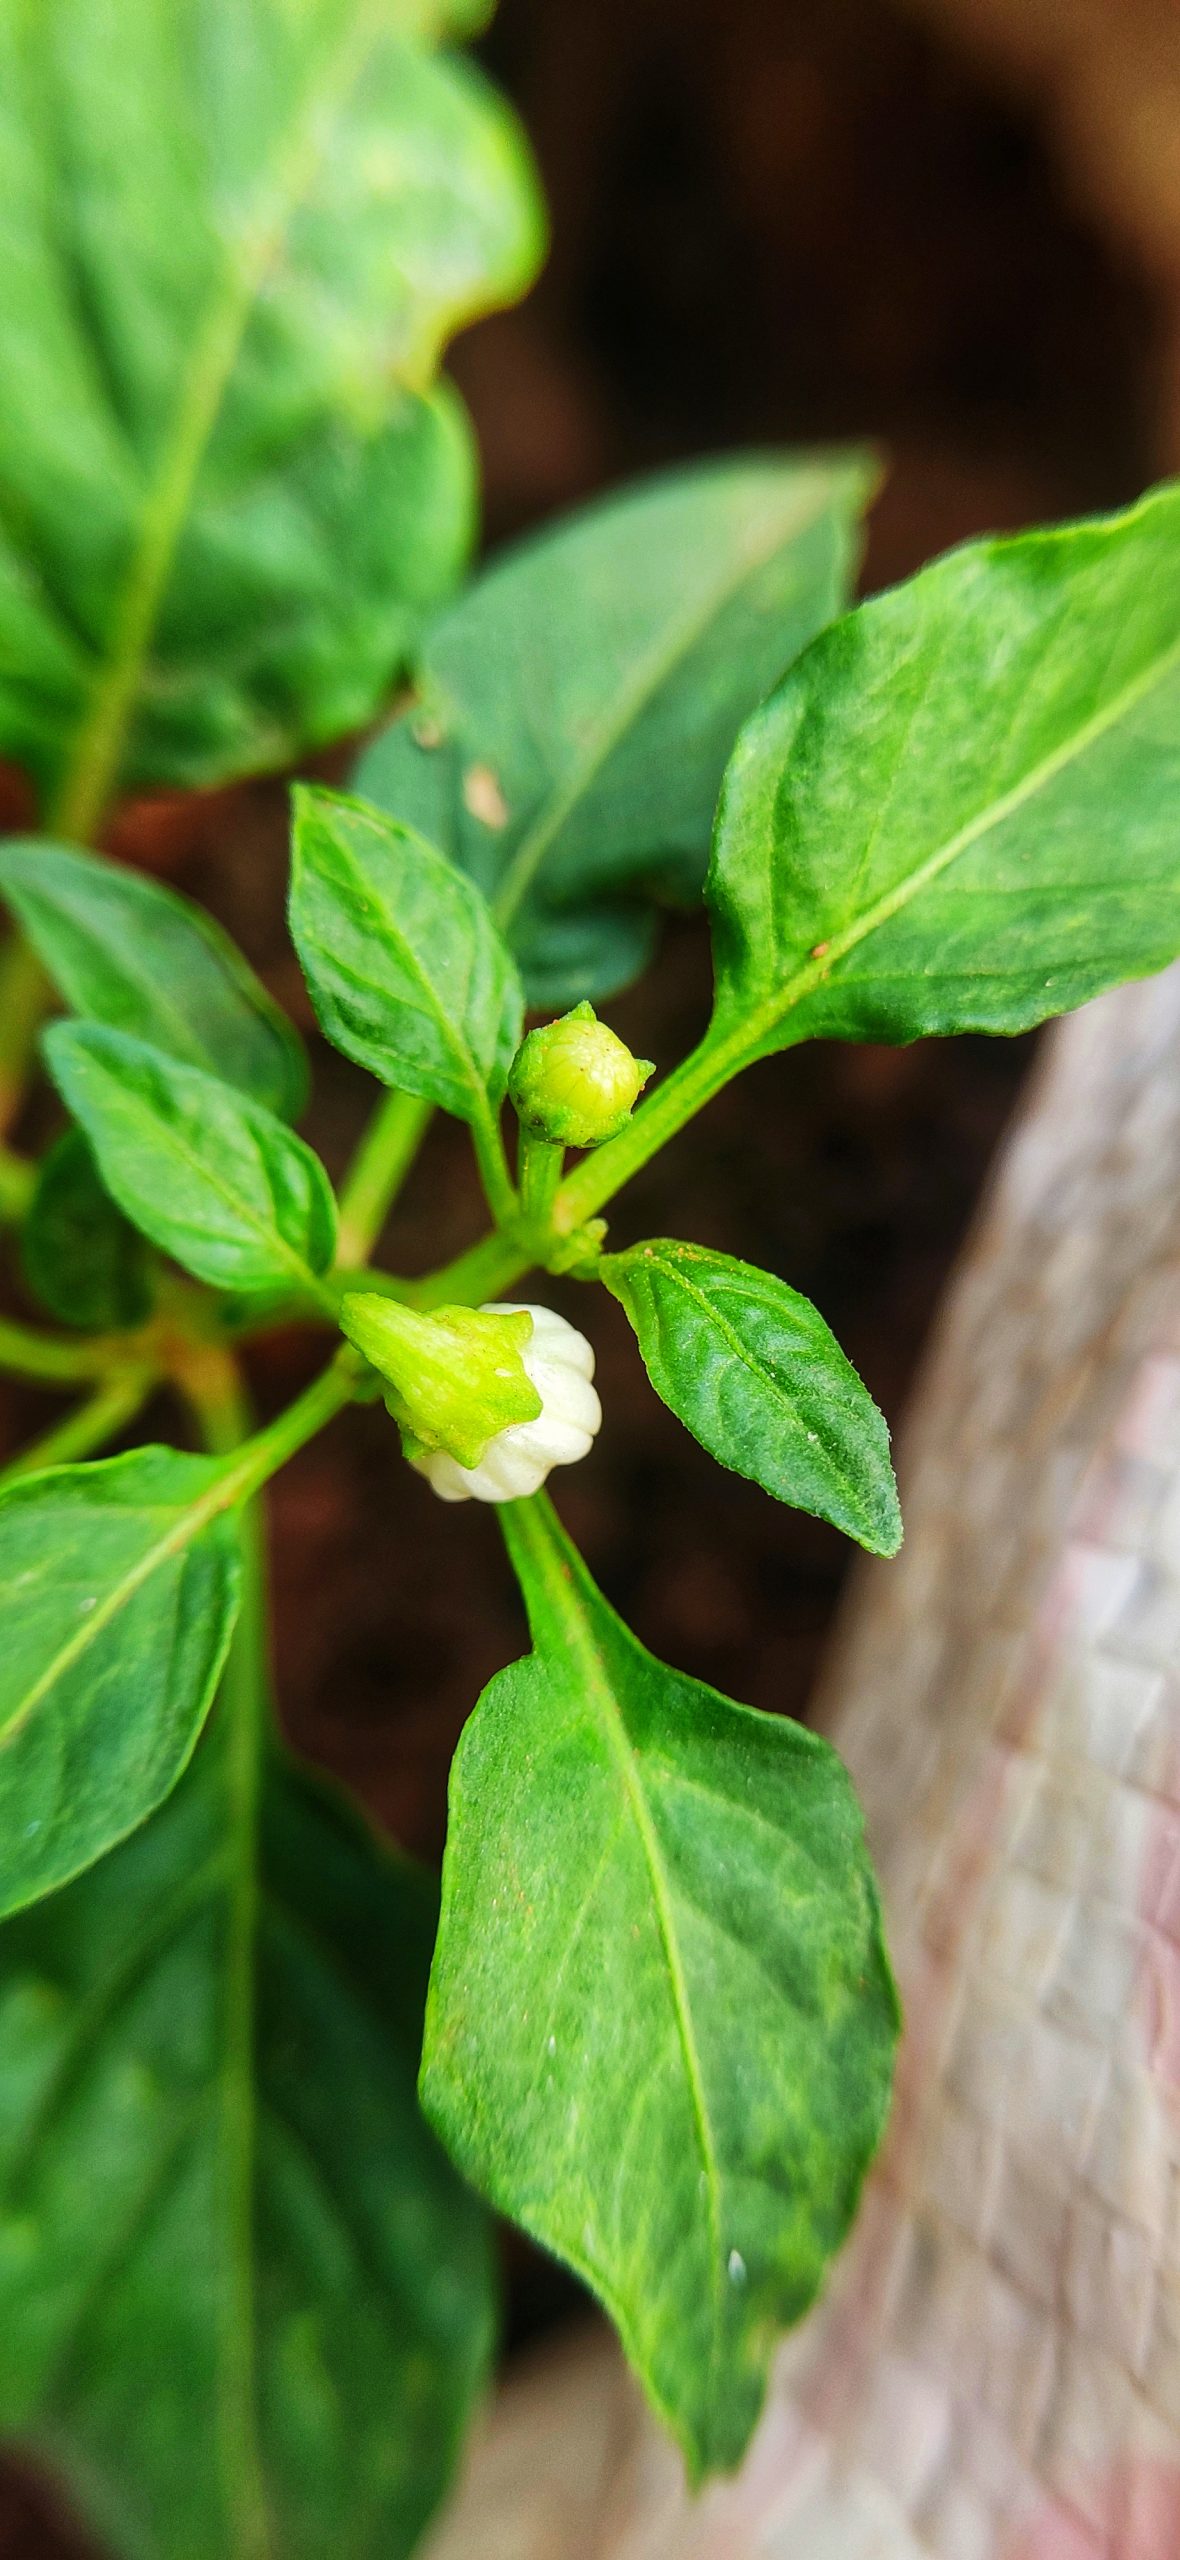 Buds of a flower plant